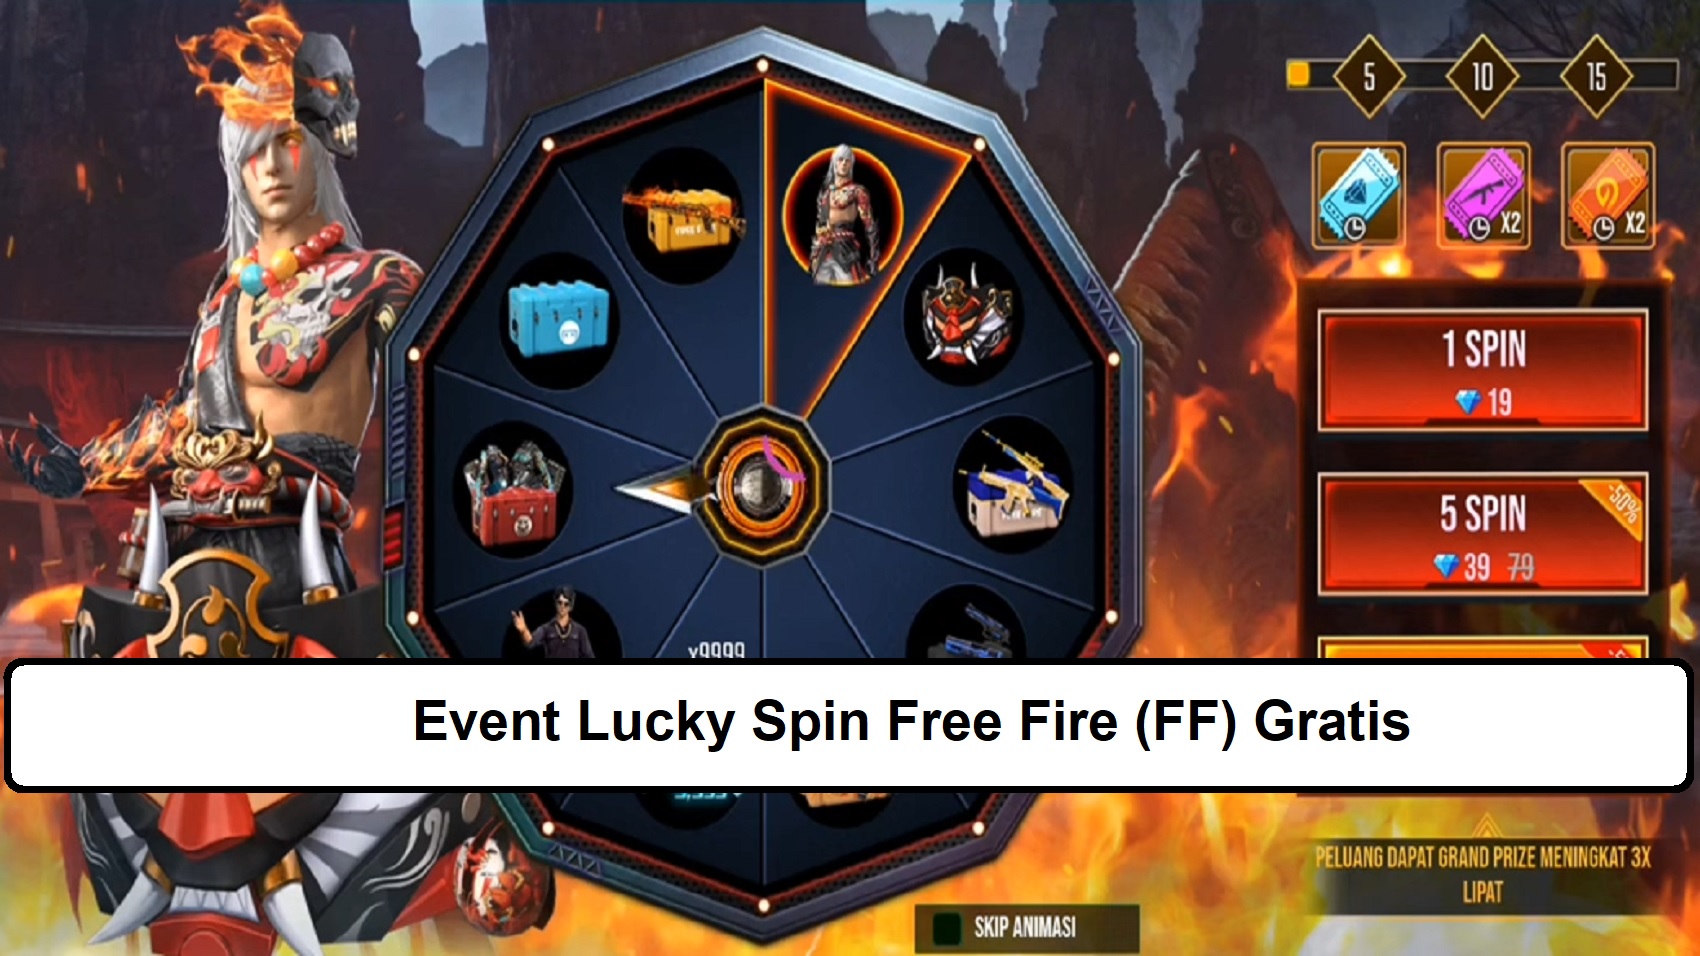 Event Lucky Spin Free Fire (FF) Gratis